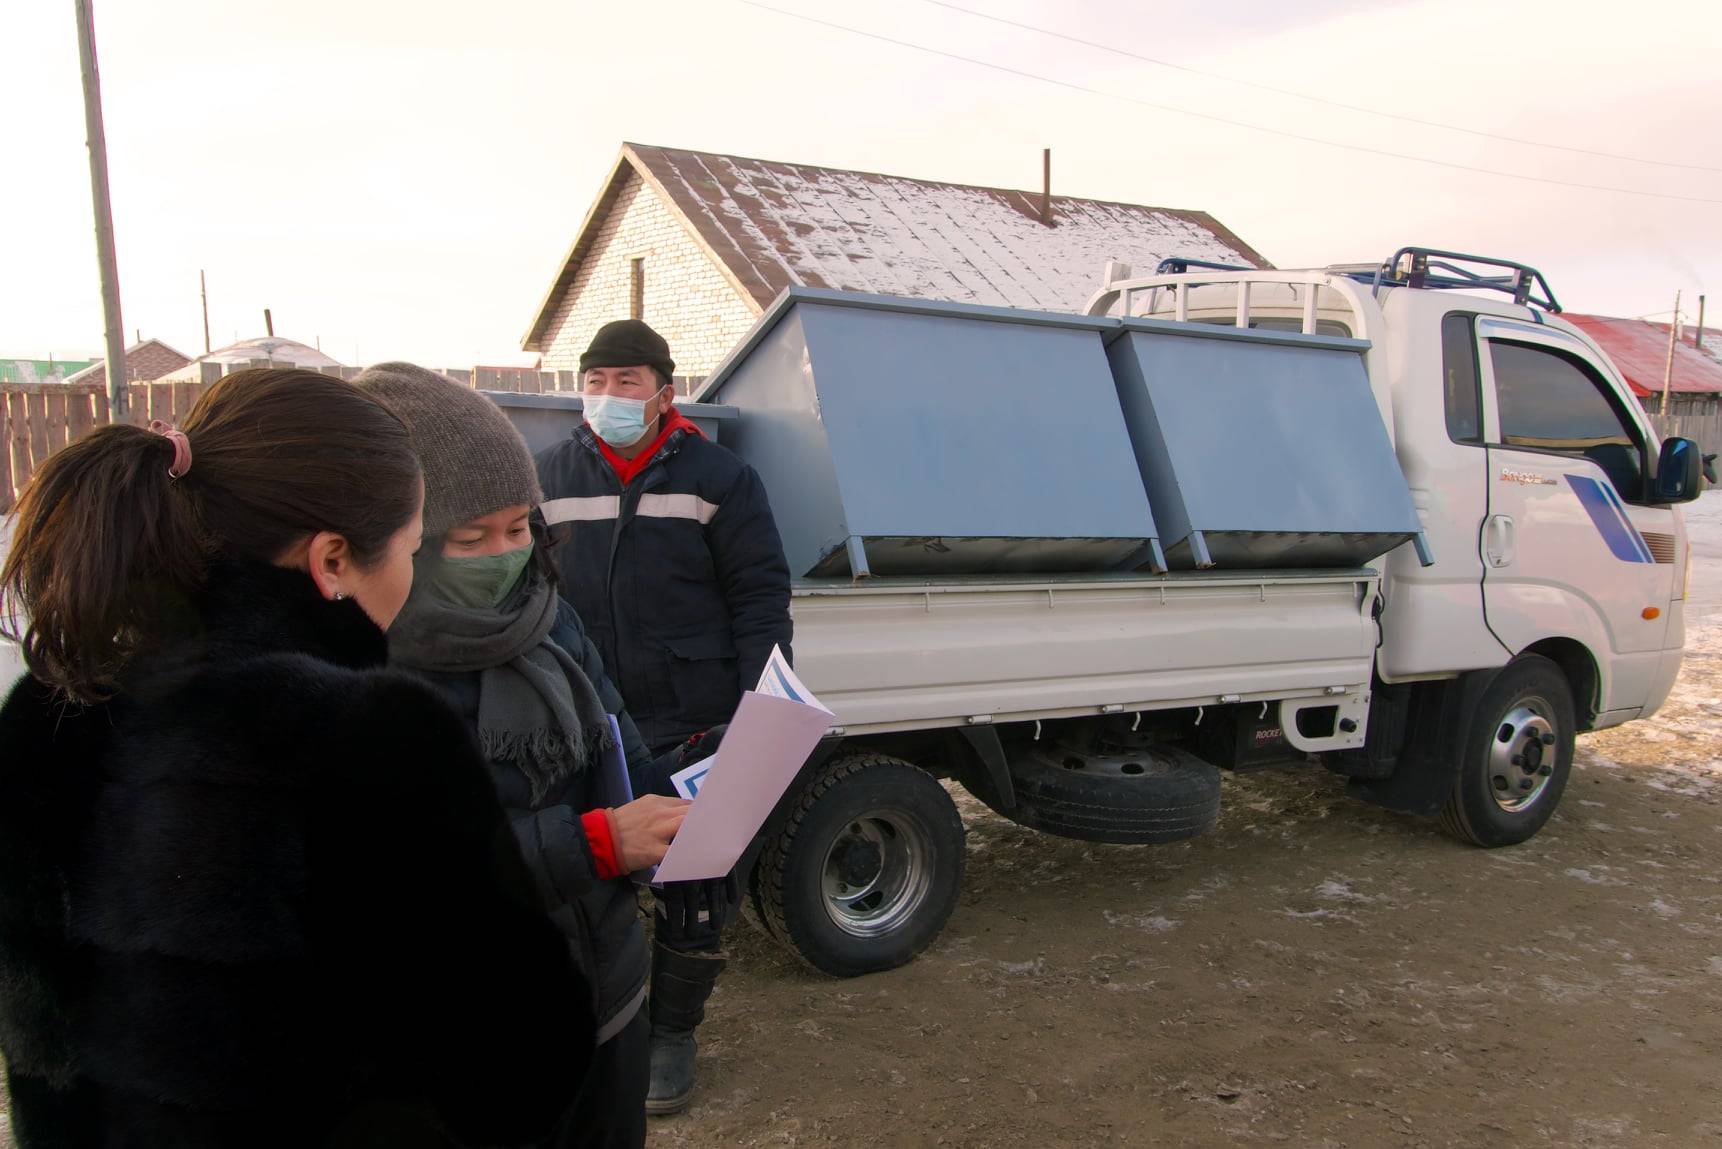 Sustainable Plastic Recycling in Mongolia (SPRIM)